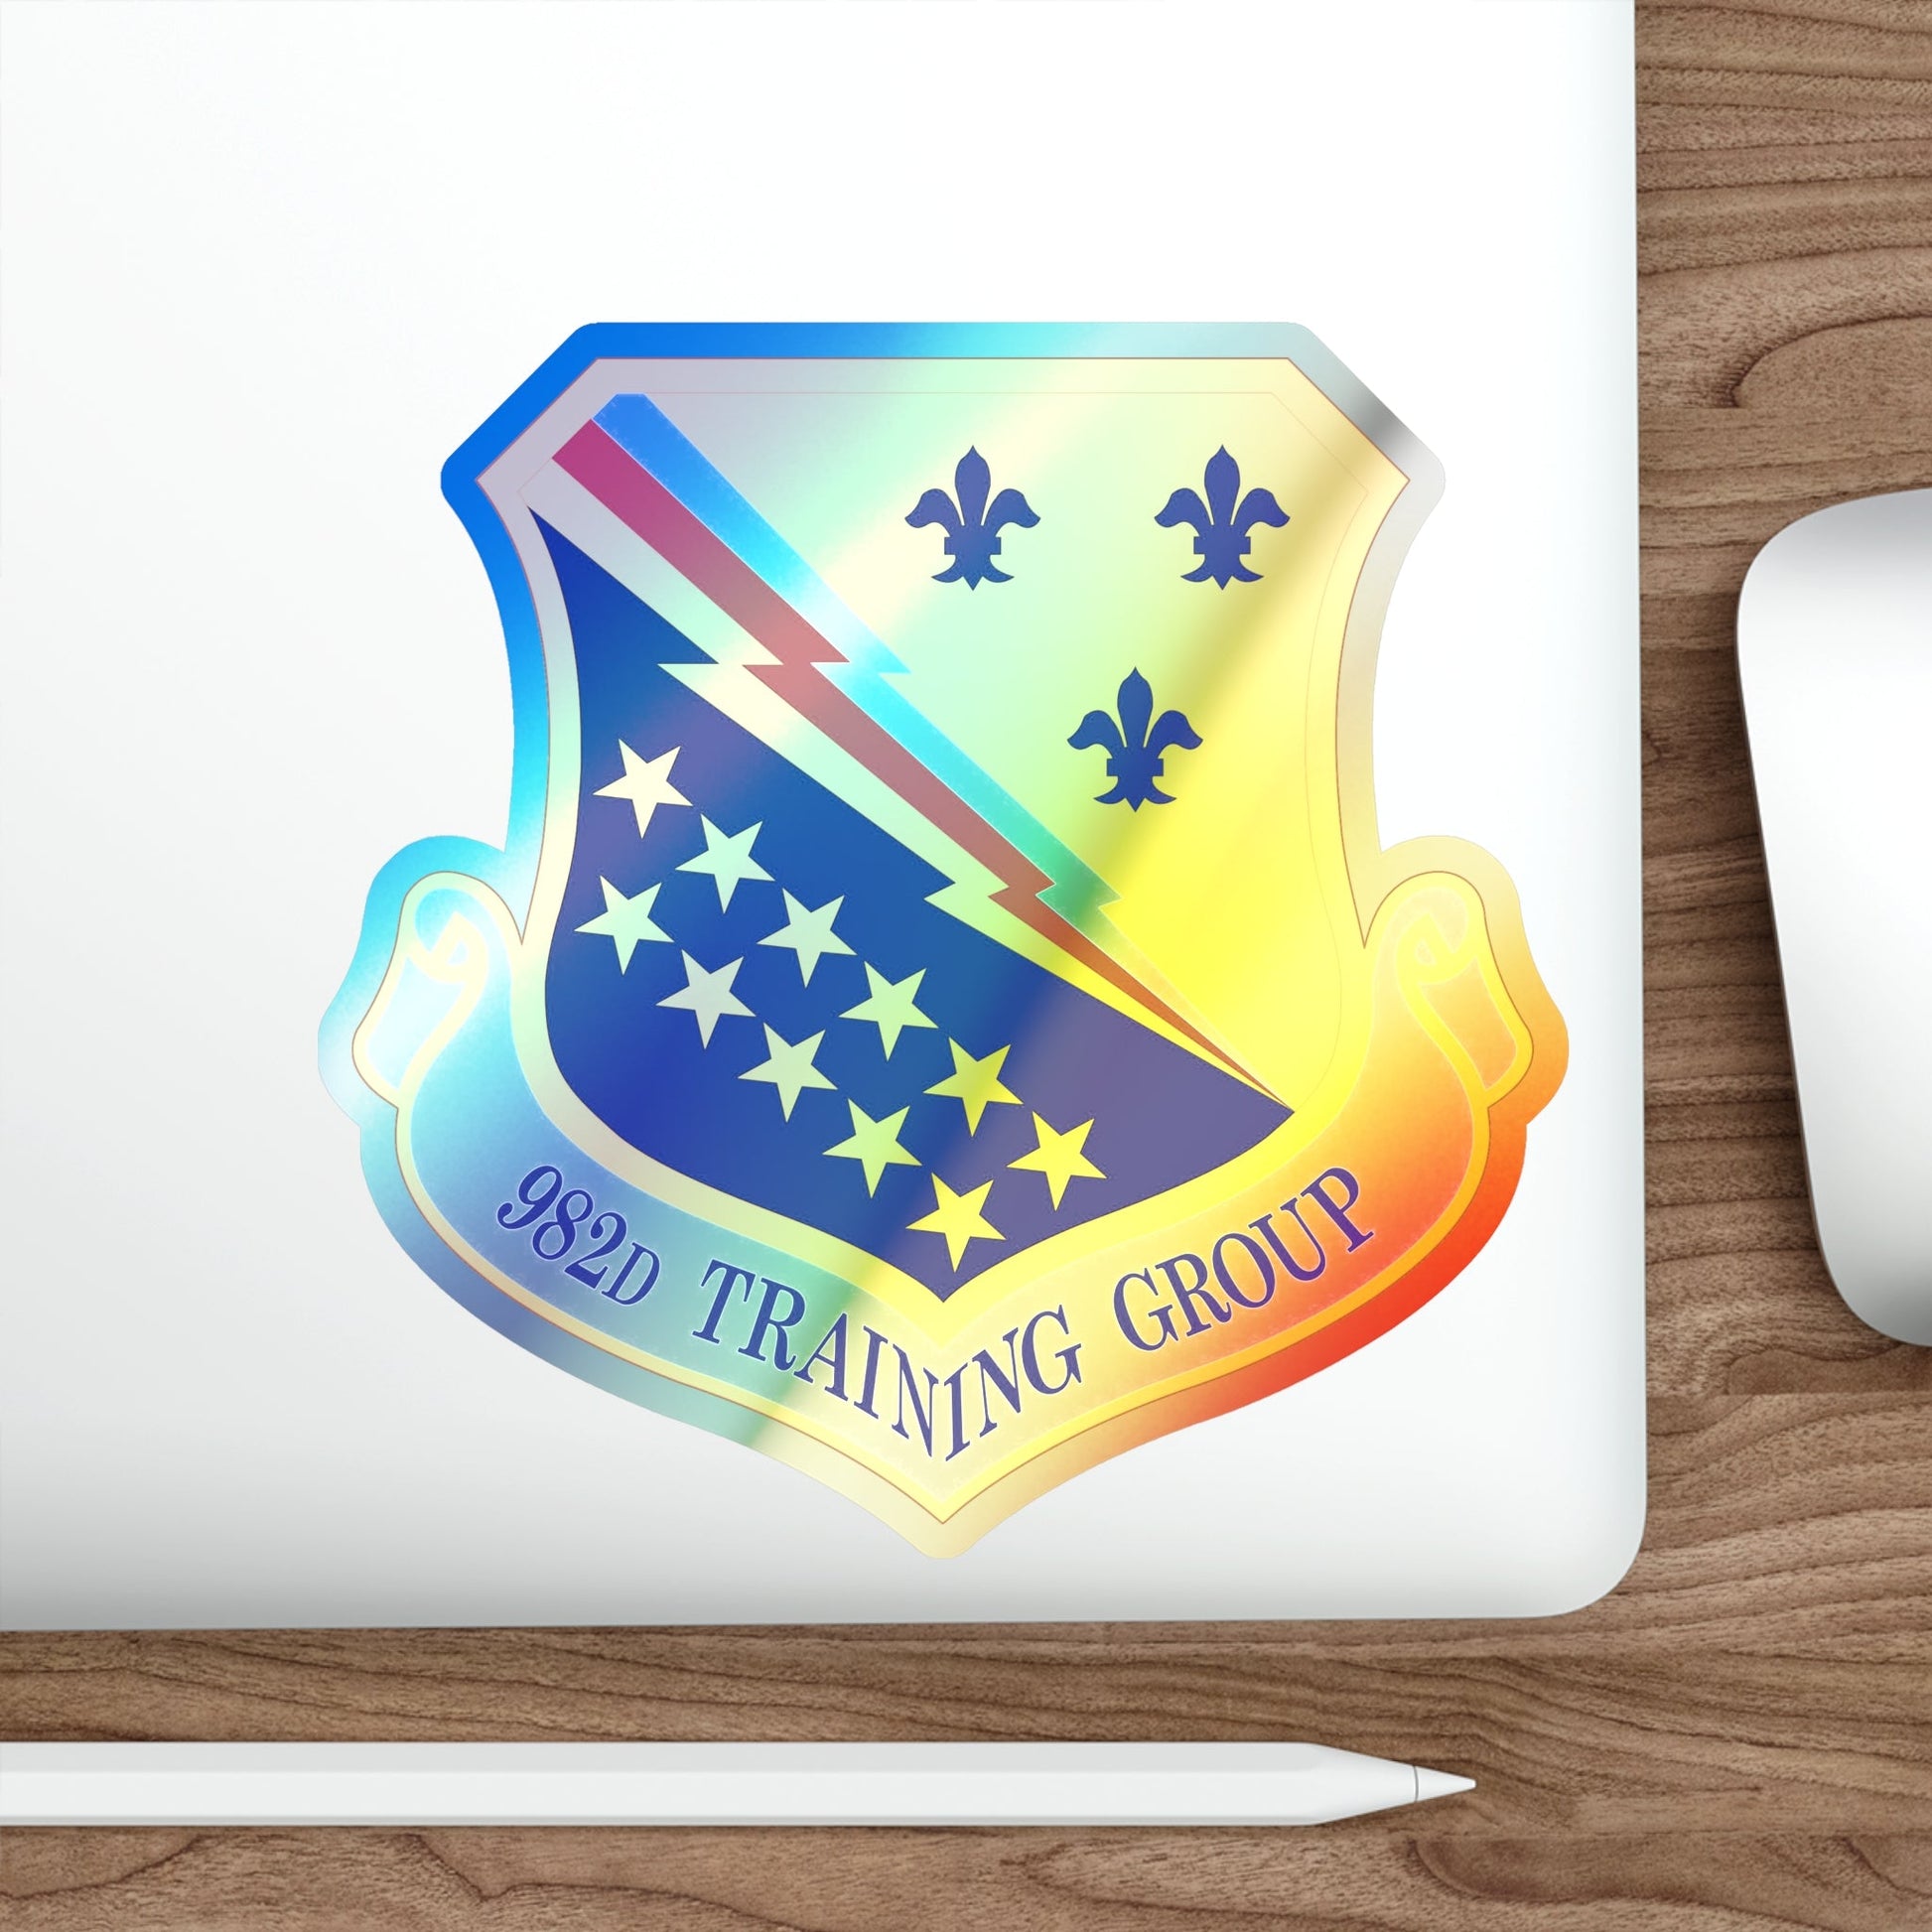 982d Training Group (U.S. Air Force) Holographic STICKER Die-Cut Vinyl Decal-The Sticker Space